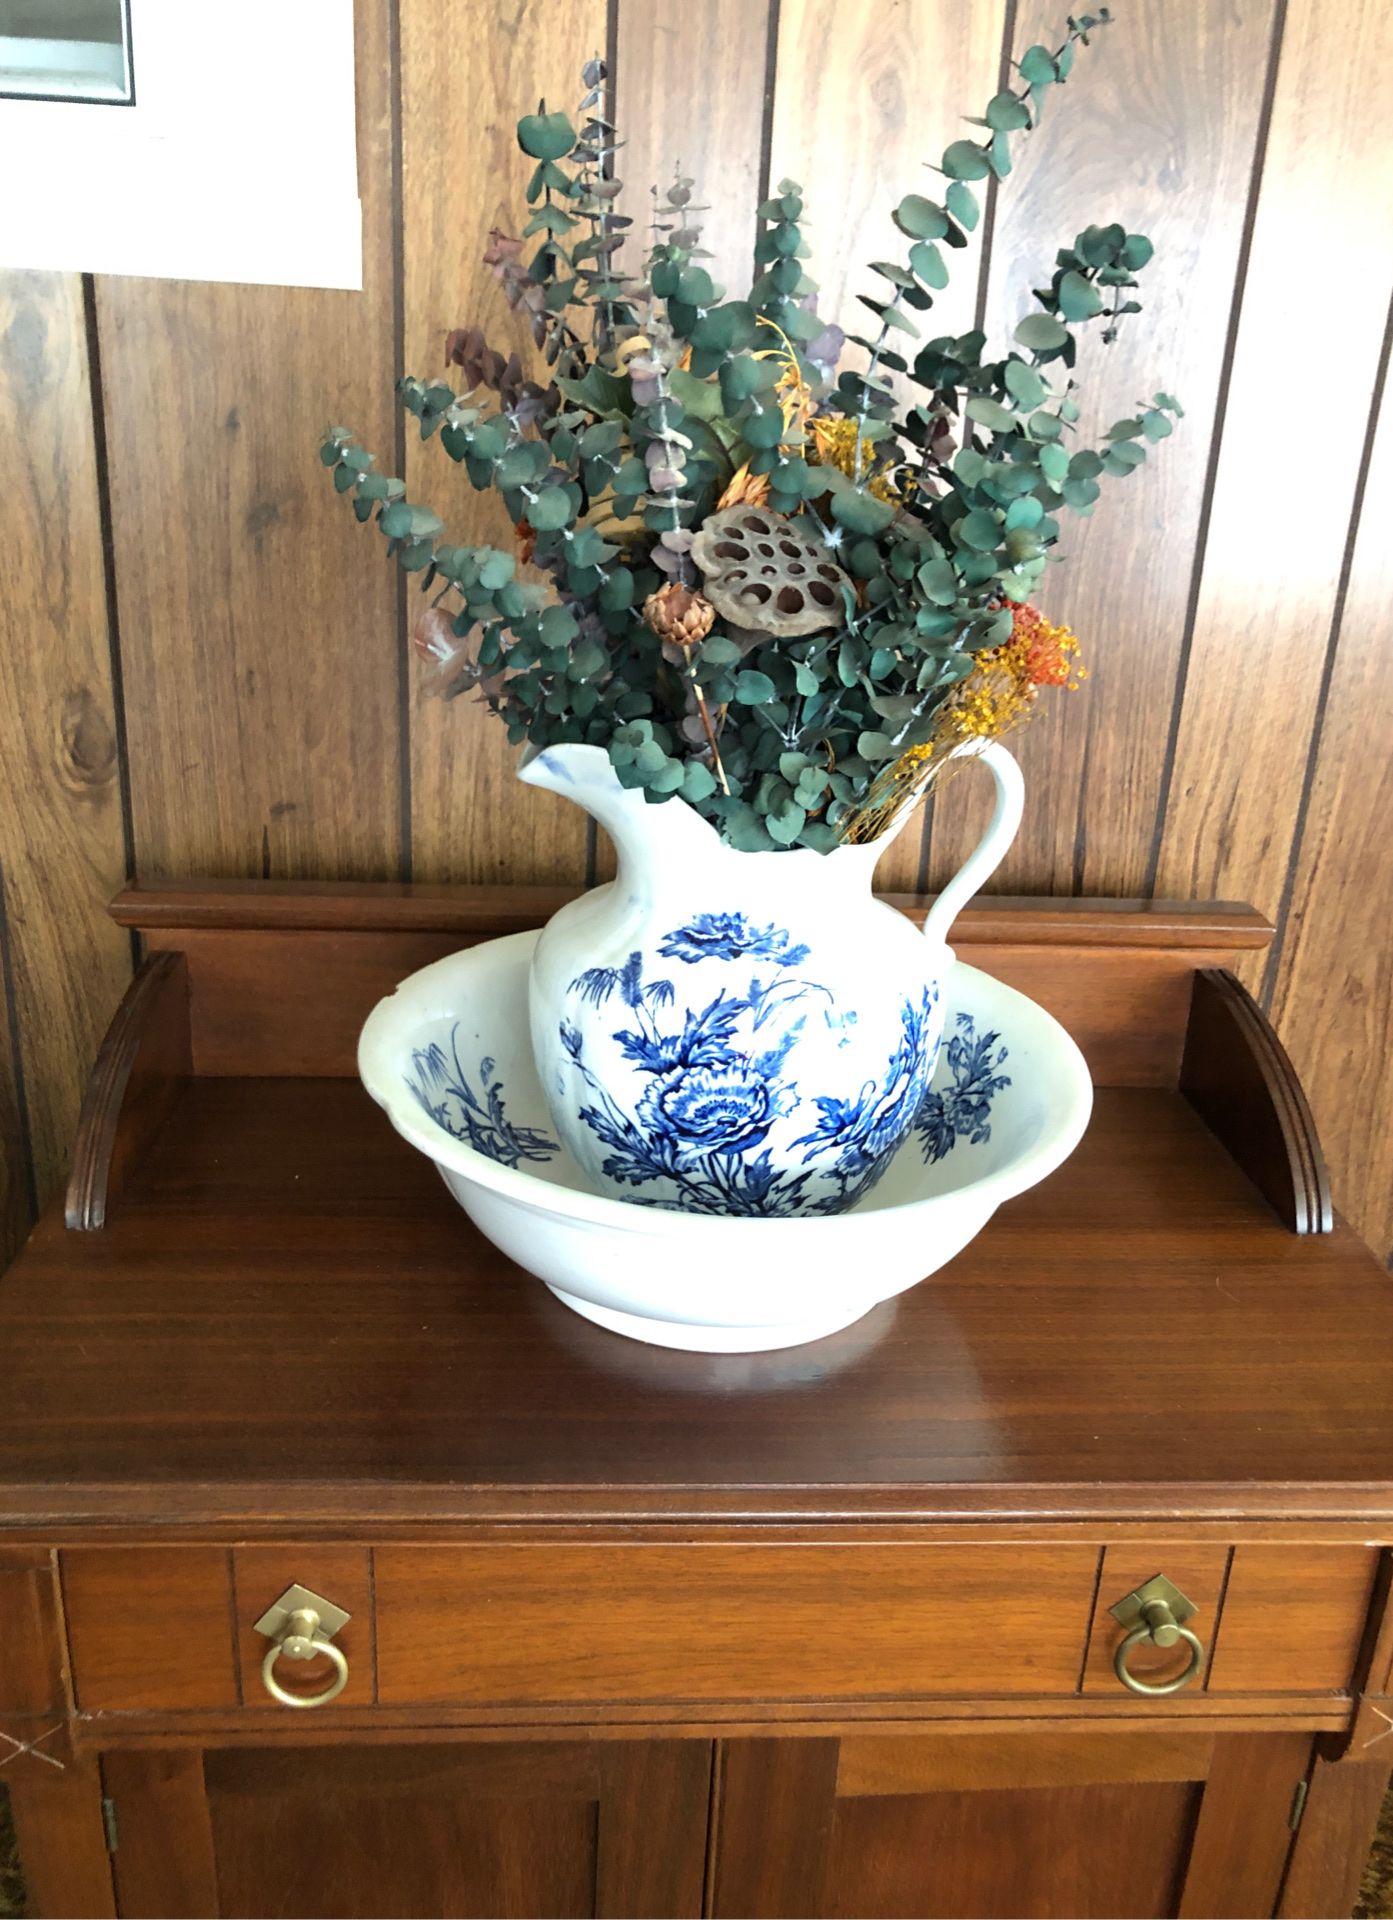 Vintage picture and bowl